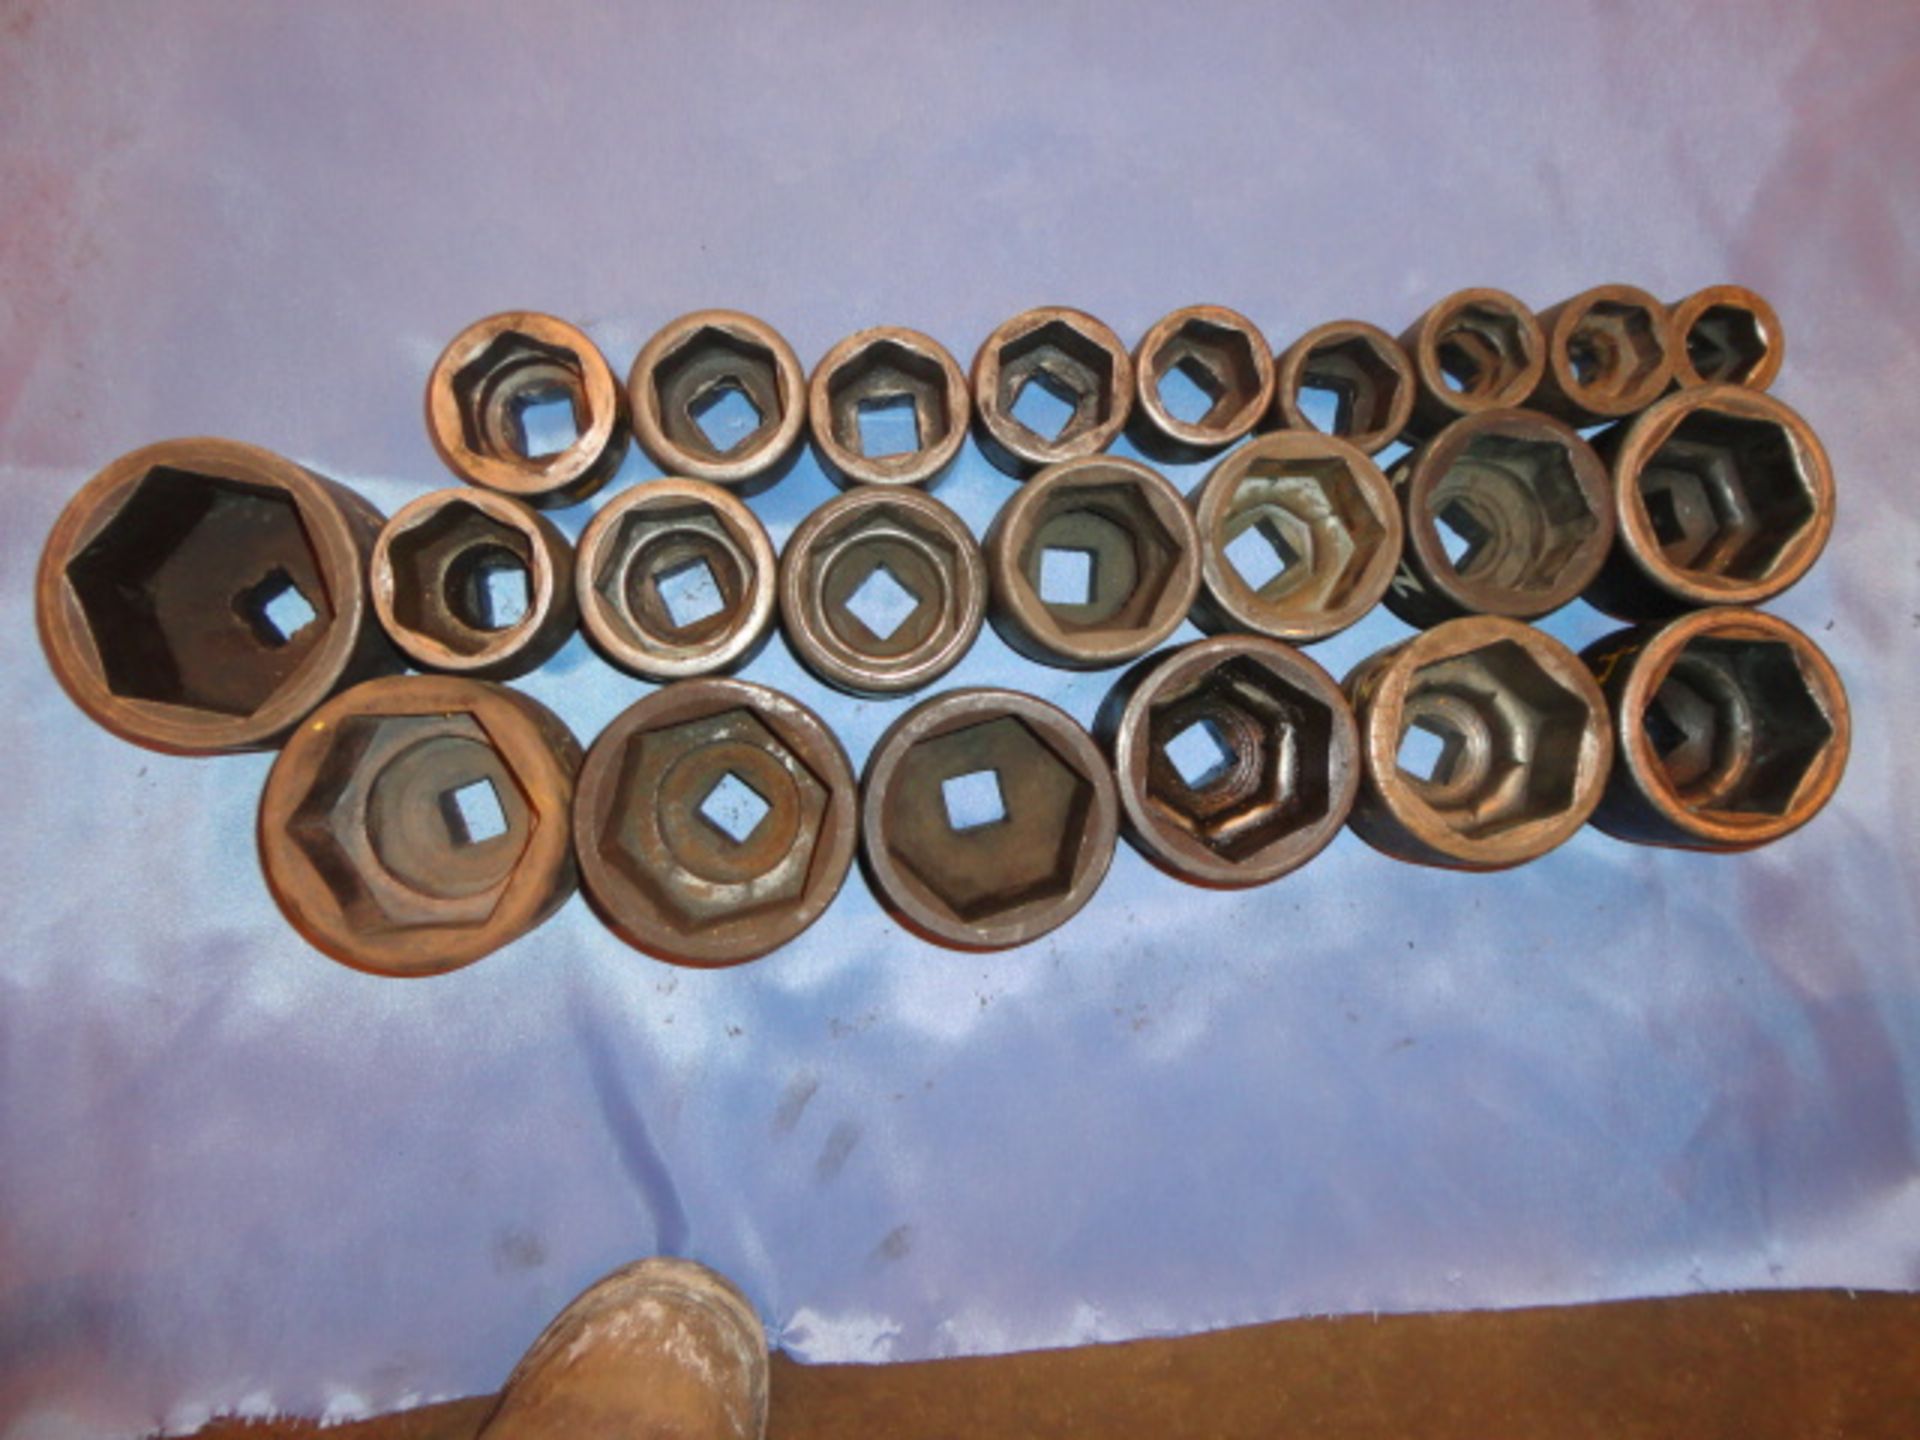 Lot Of Large Sockets - 1 in Drive  - Socket Size Up To 3 1/2 in - Image 6 of 8